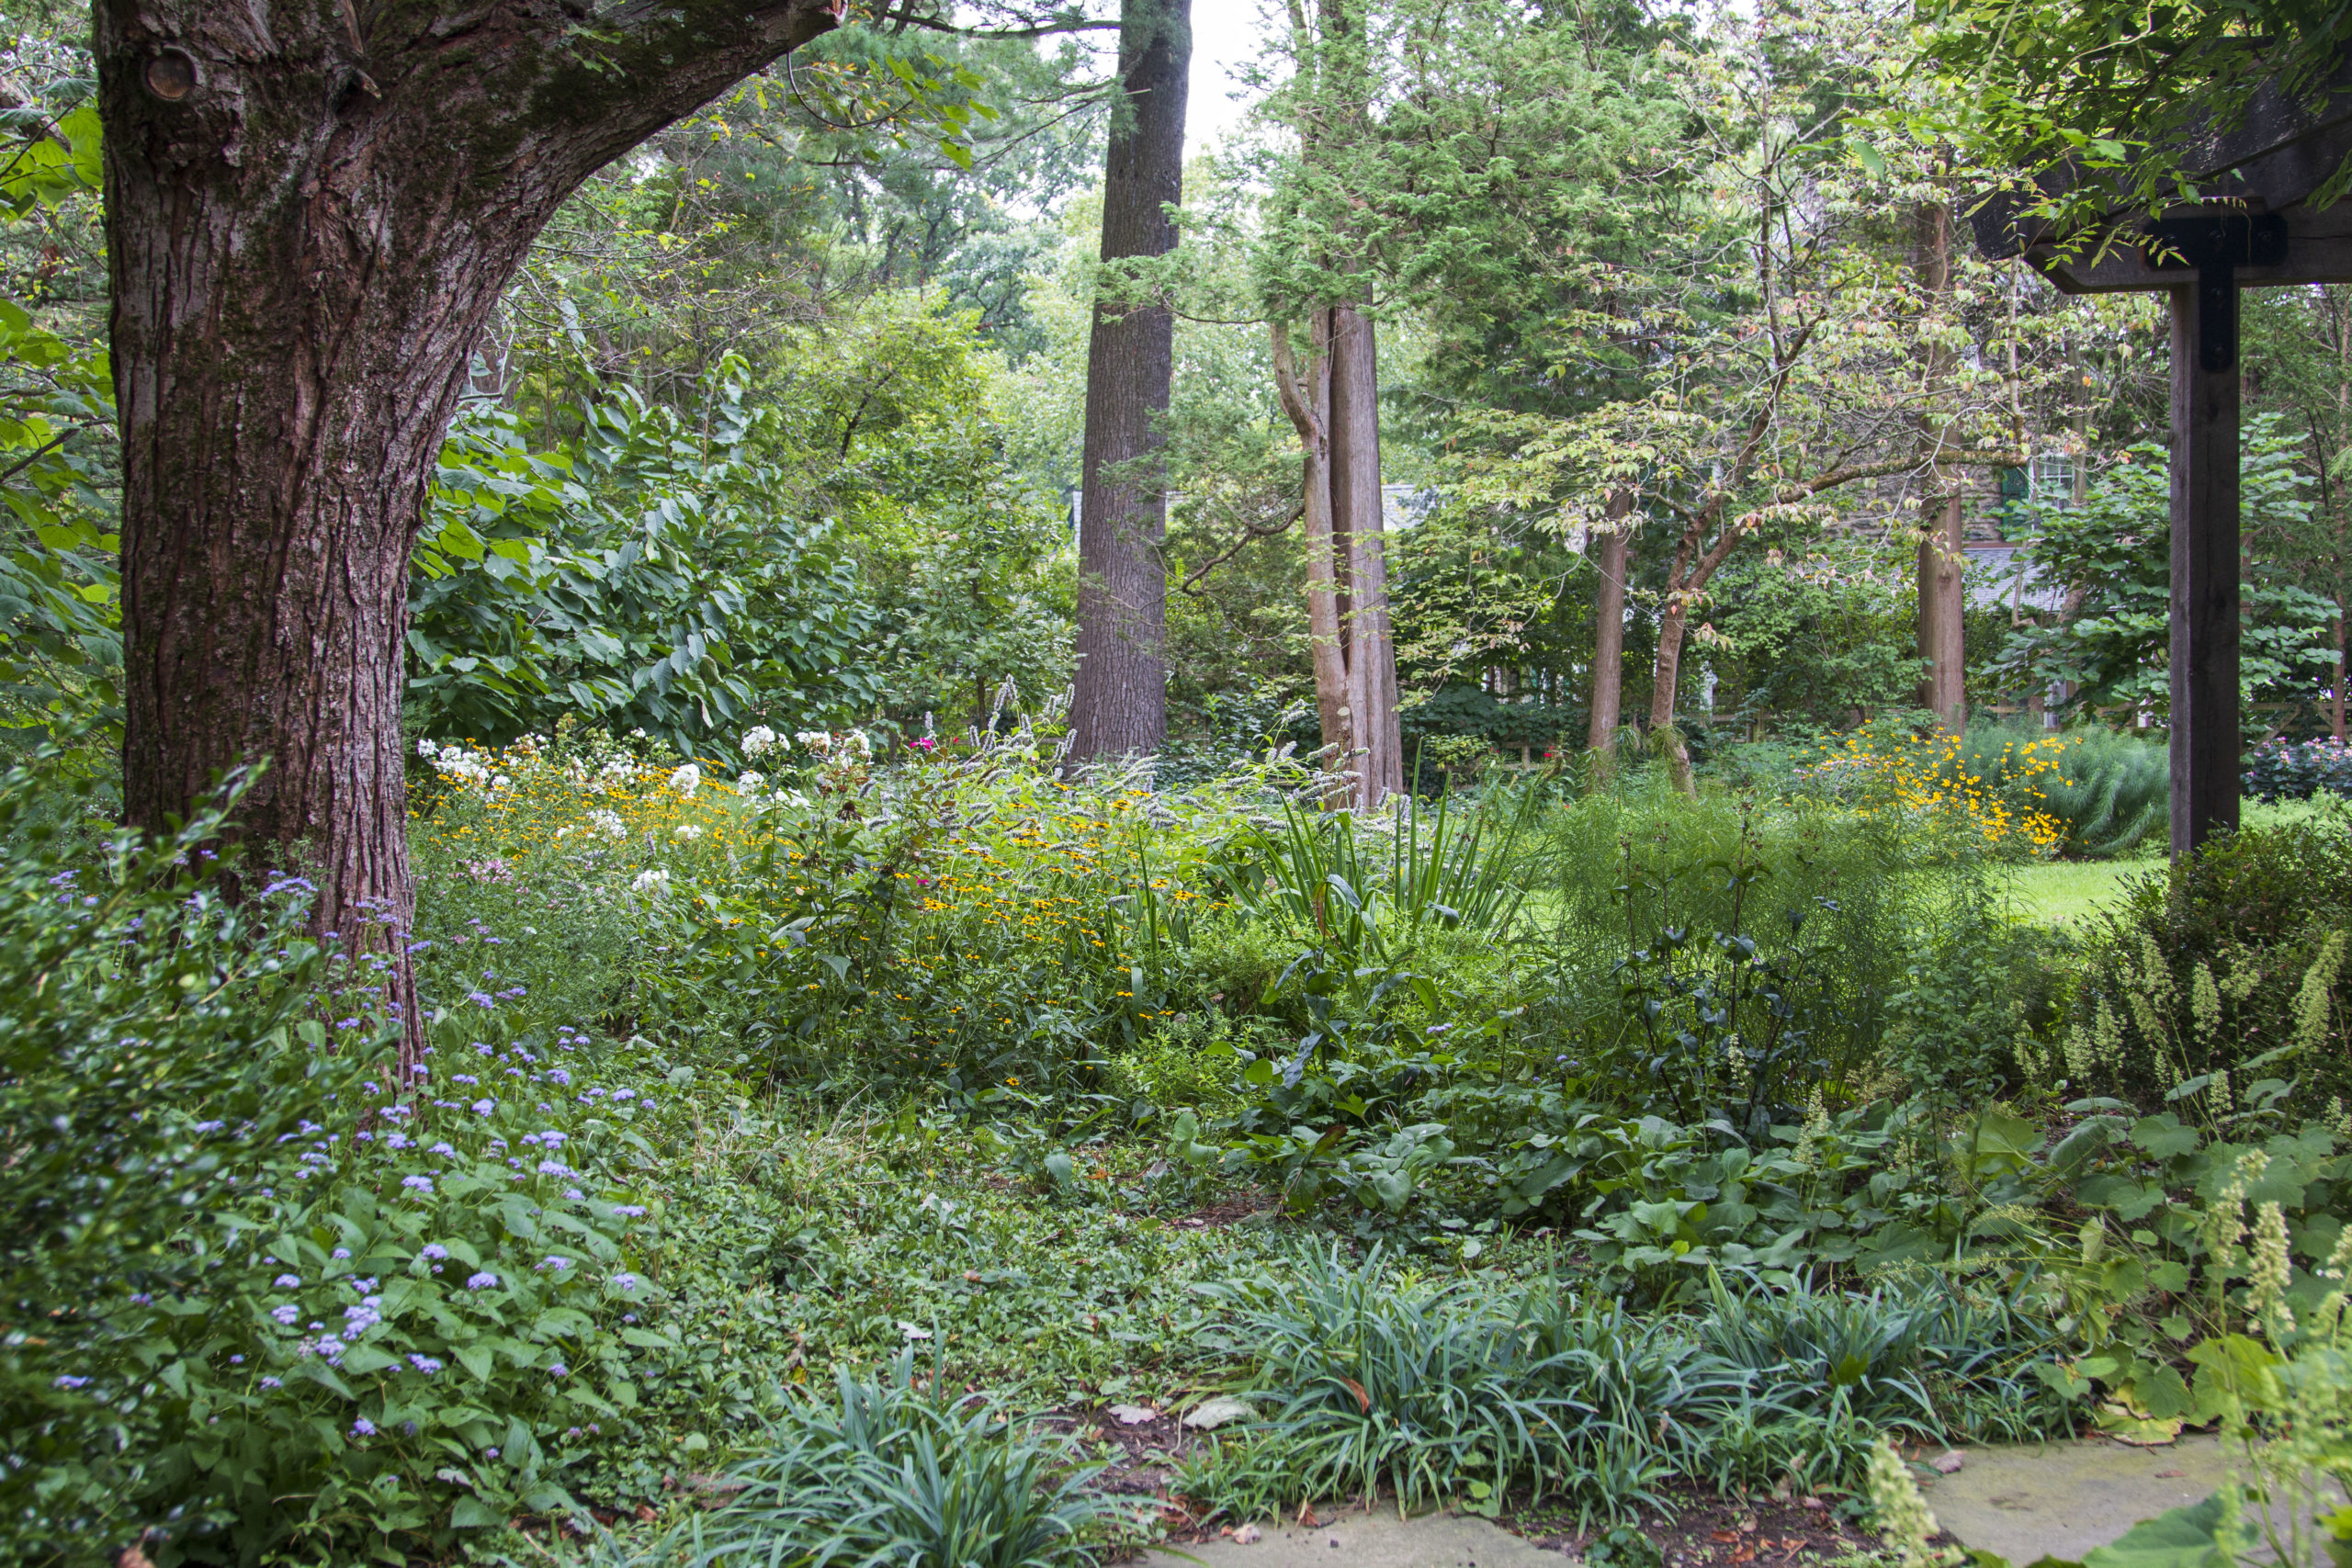 A woodland ground layer of native sedges, coral bells, and ageratum under a large tree